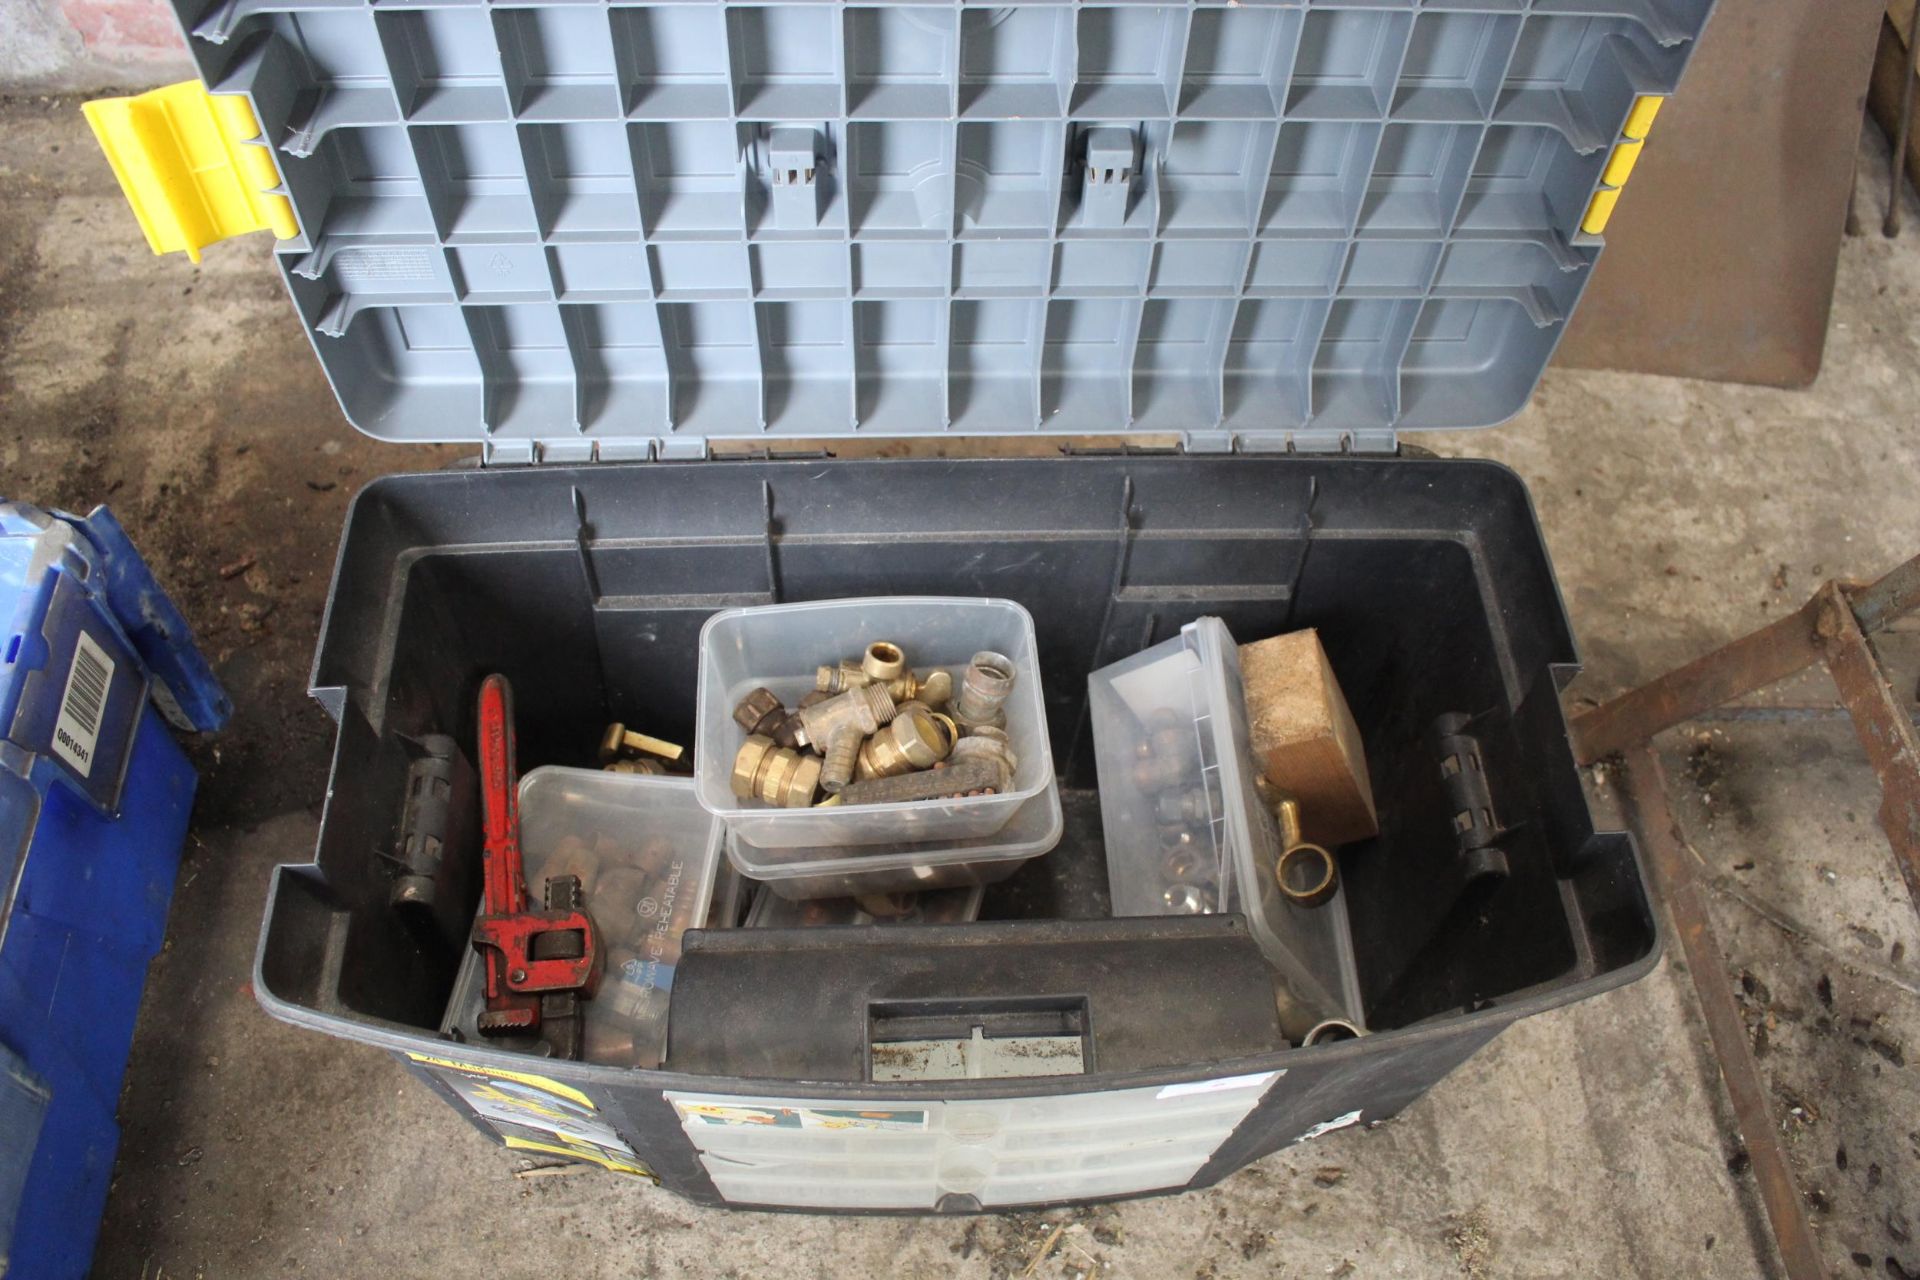 A PLASTIC TOOL BOX WITH AN ASSORTMENT OF BRASS PIPE FITTINGS AND A PAIR OF STILSENS